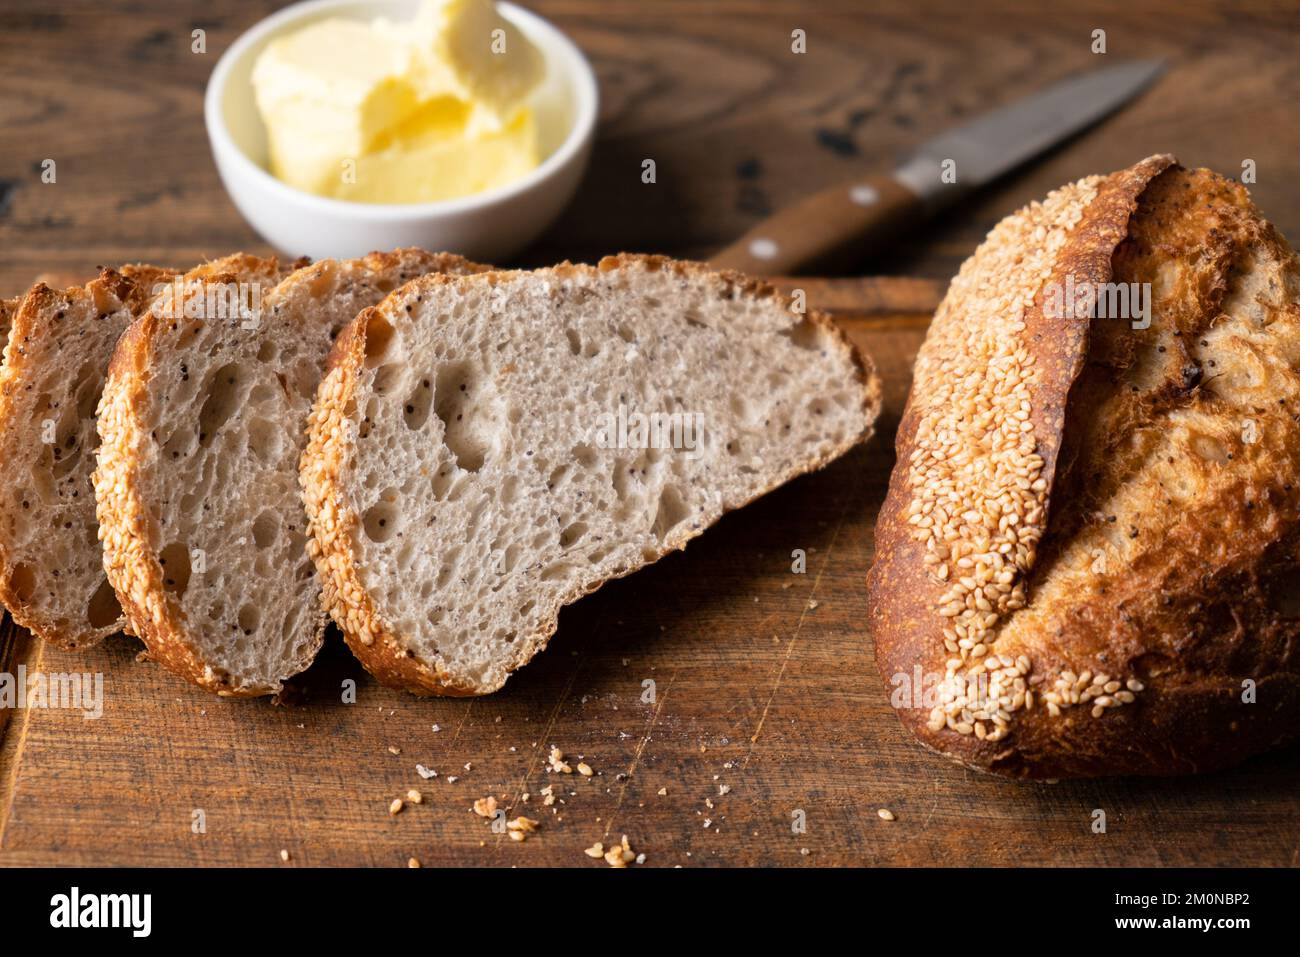 Artisan bread and butter on wooden board. Healthy white leavened bread Stock Photo